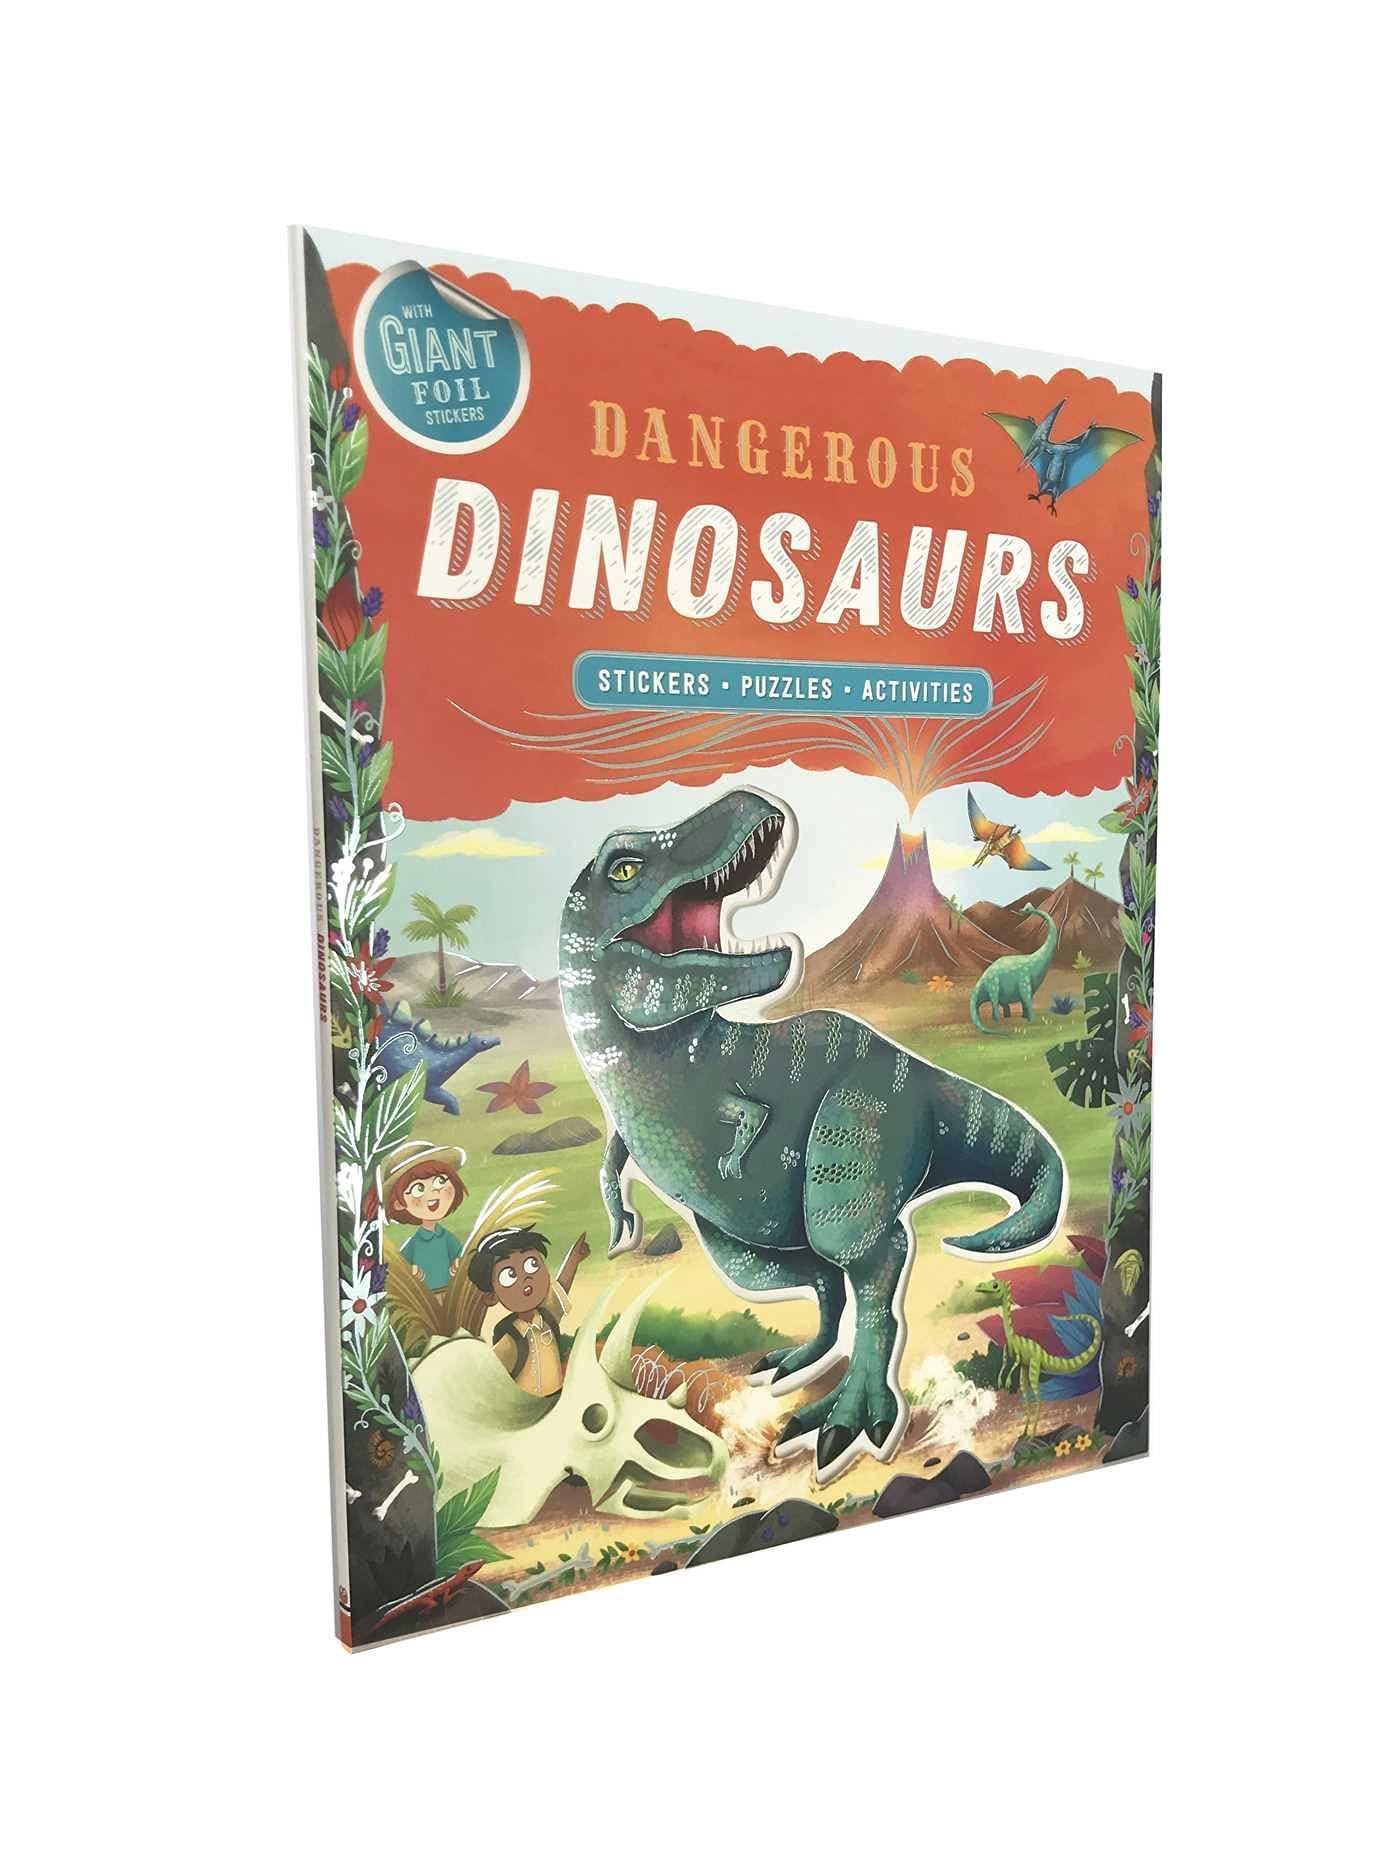 Dangerous Dinosaurs: Giant Foil Sticker Book with Puzzles and Activities - Khủng long nguy hiểm